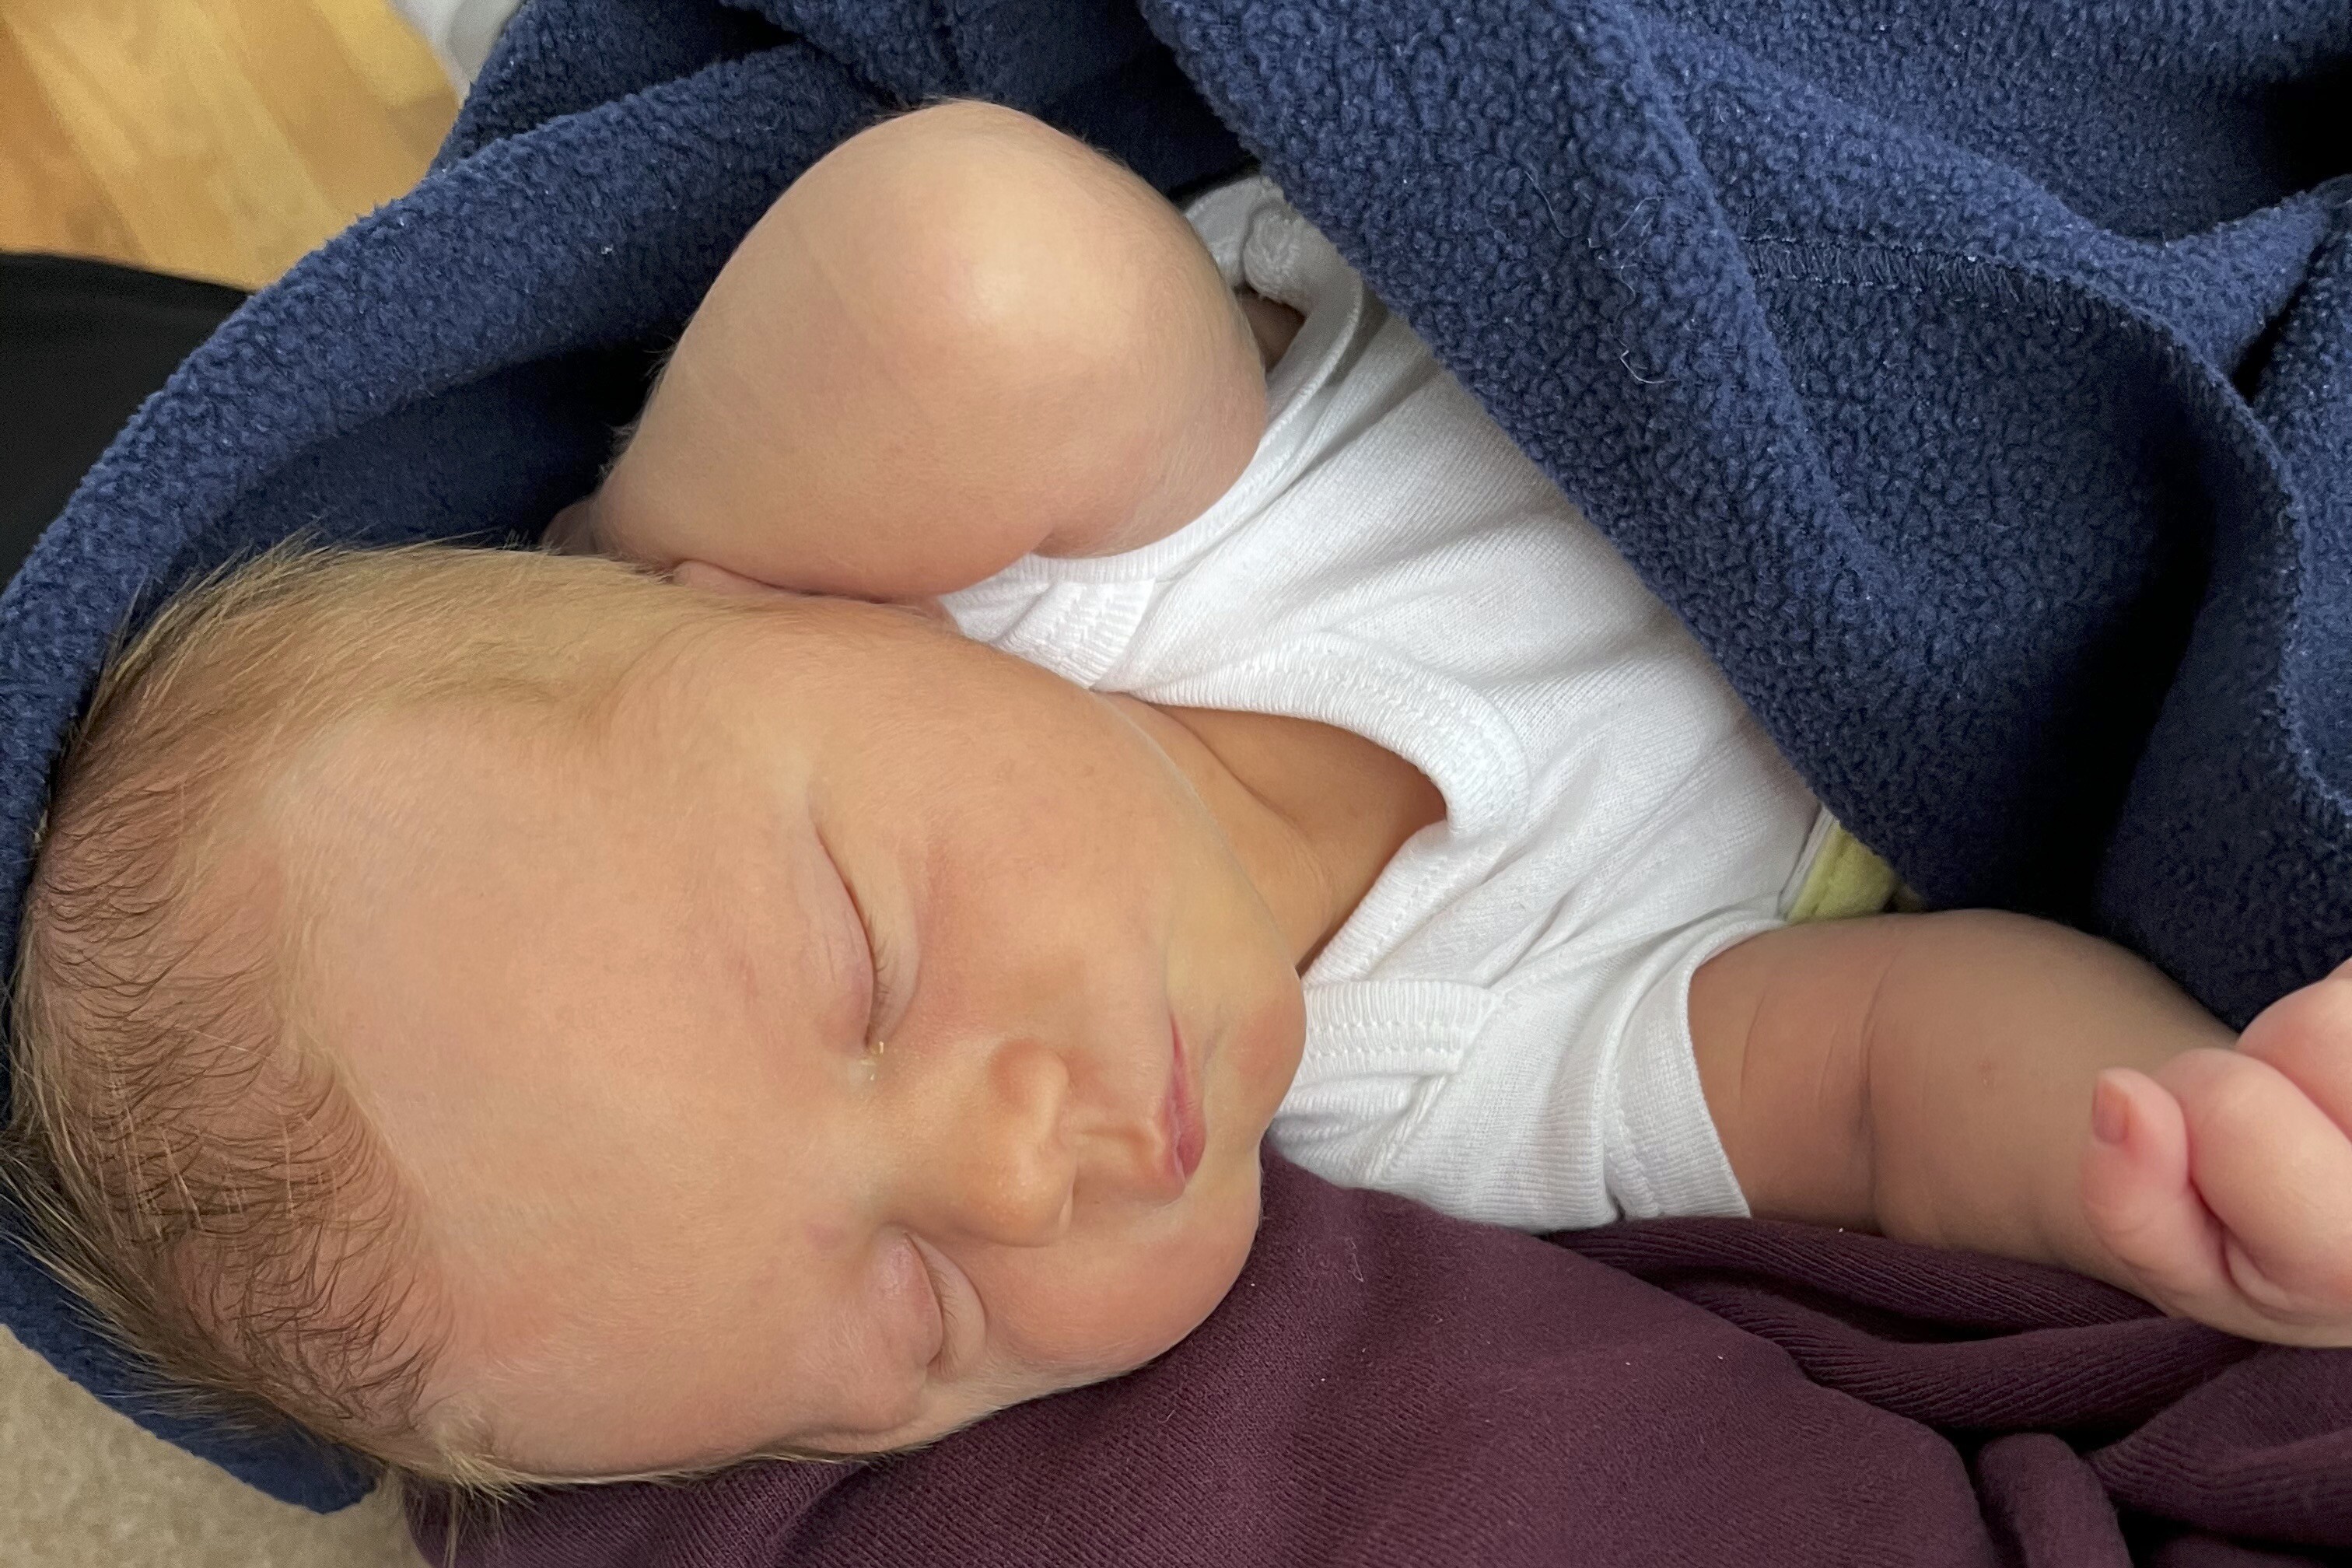 Close up of a sleeping infant swaddled in a blue blanket.